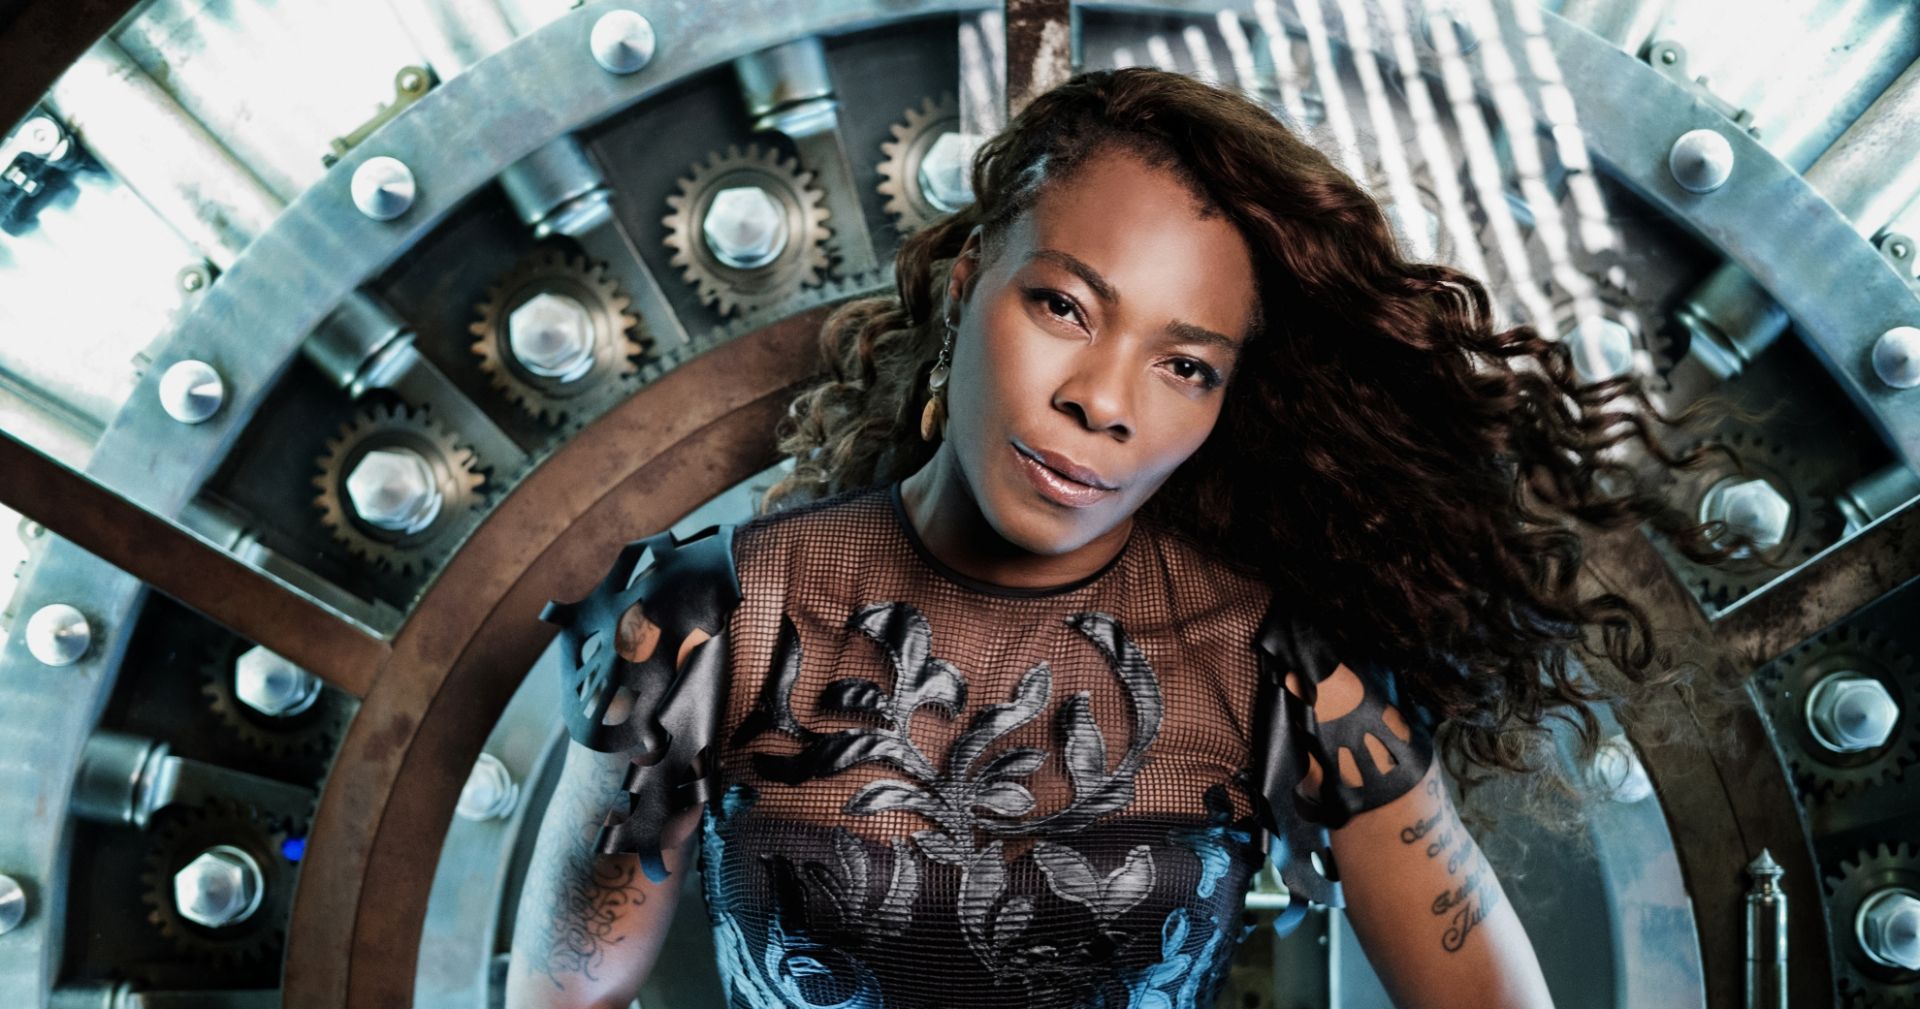 A confident woman in a stylish outfit poses in front of a mechanical, gear-filled backdrop, exuding a futuristic steampunk vibe.